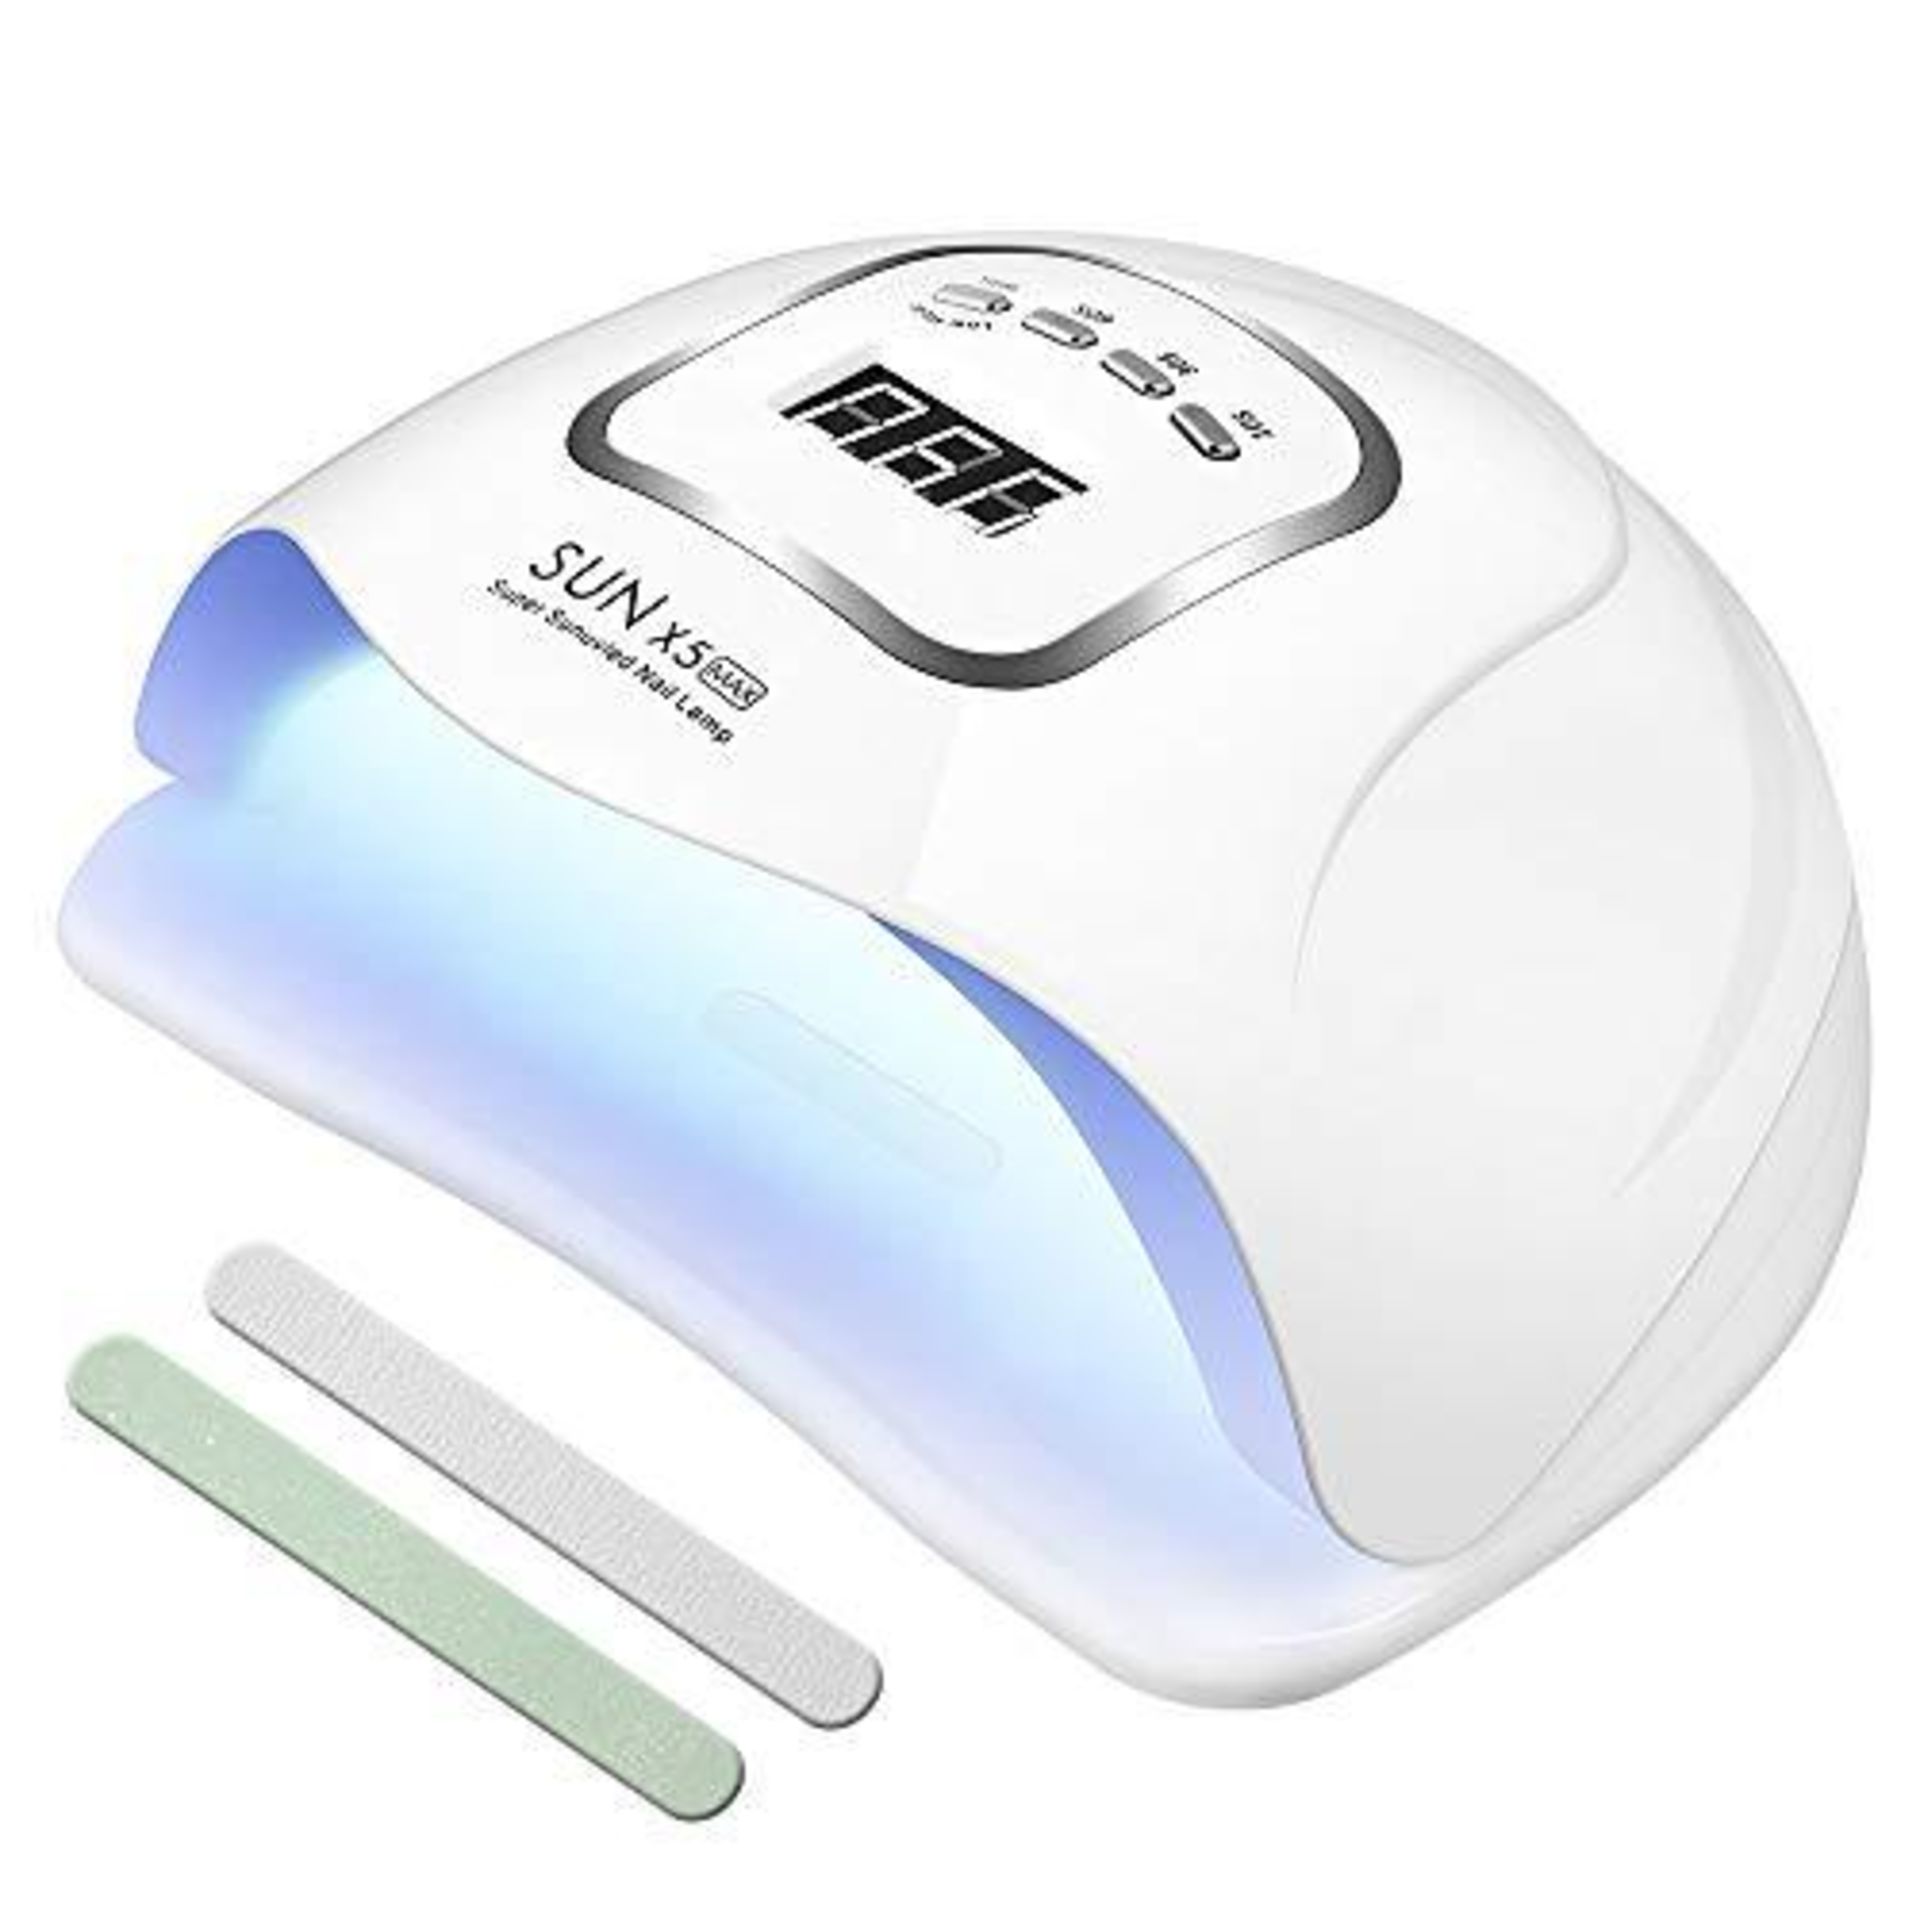 150 Watt LED UV Nail Lamp Gel Polish Curing, CCHOME Fast Nail Dryer with Timing function -10S/30S/60